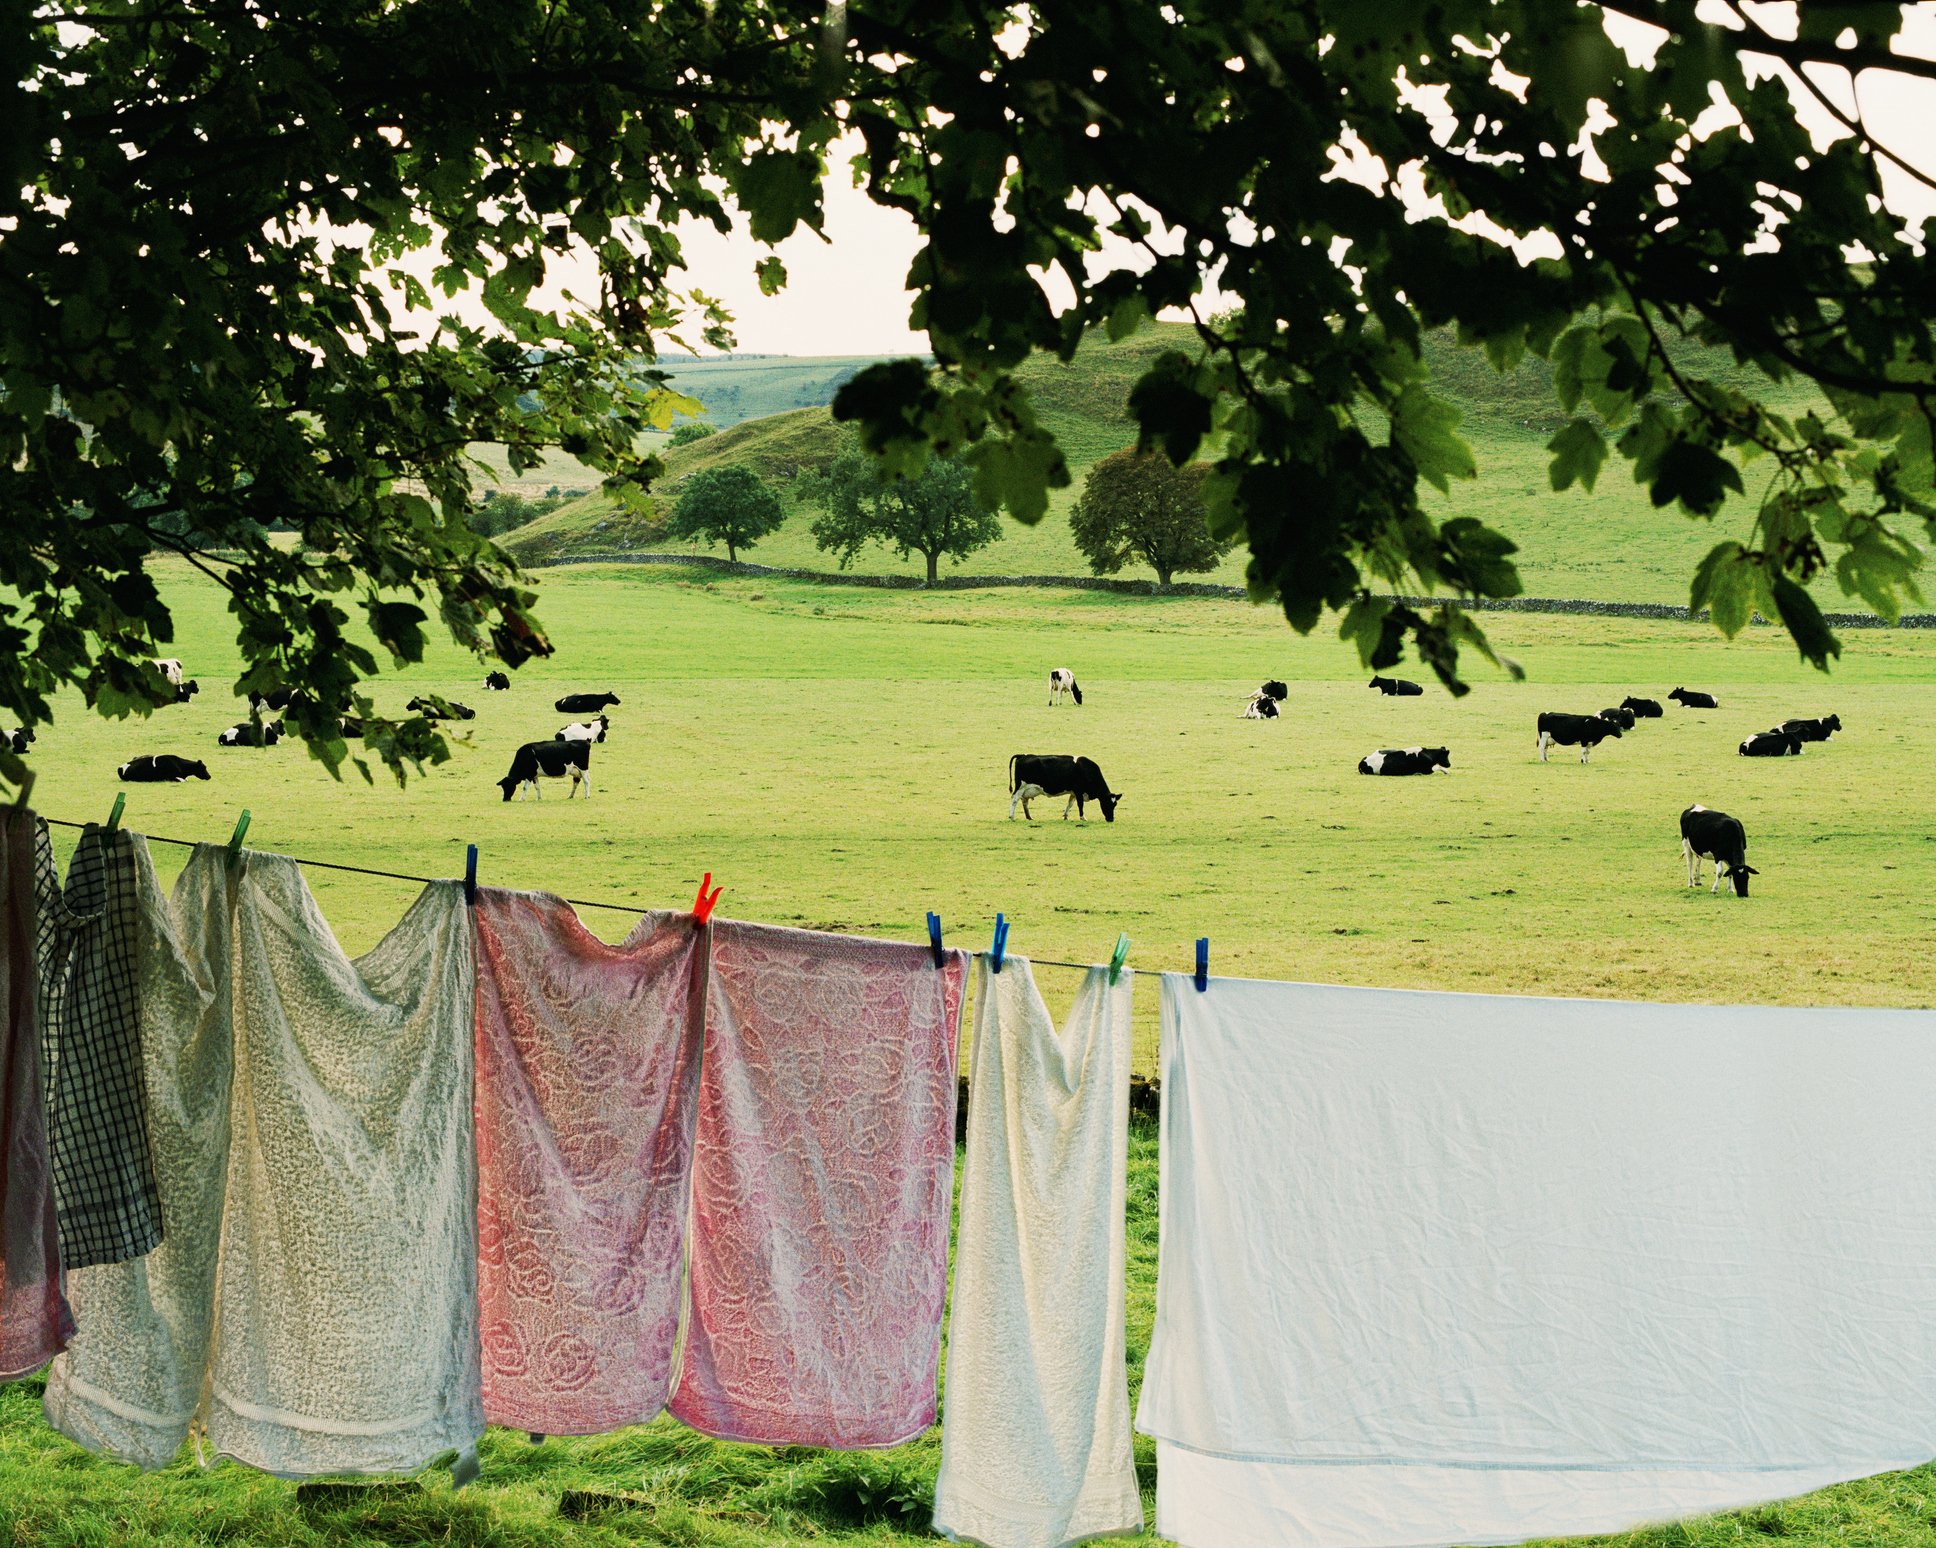 Laundry hanging with cows in the background.